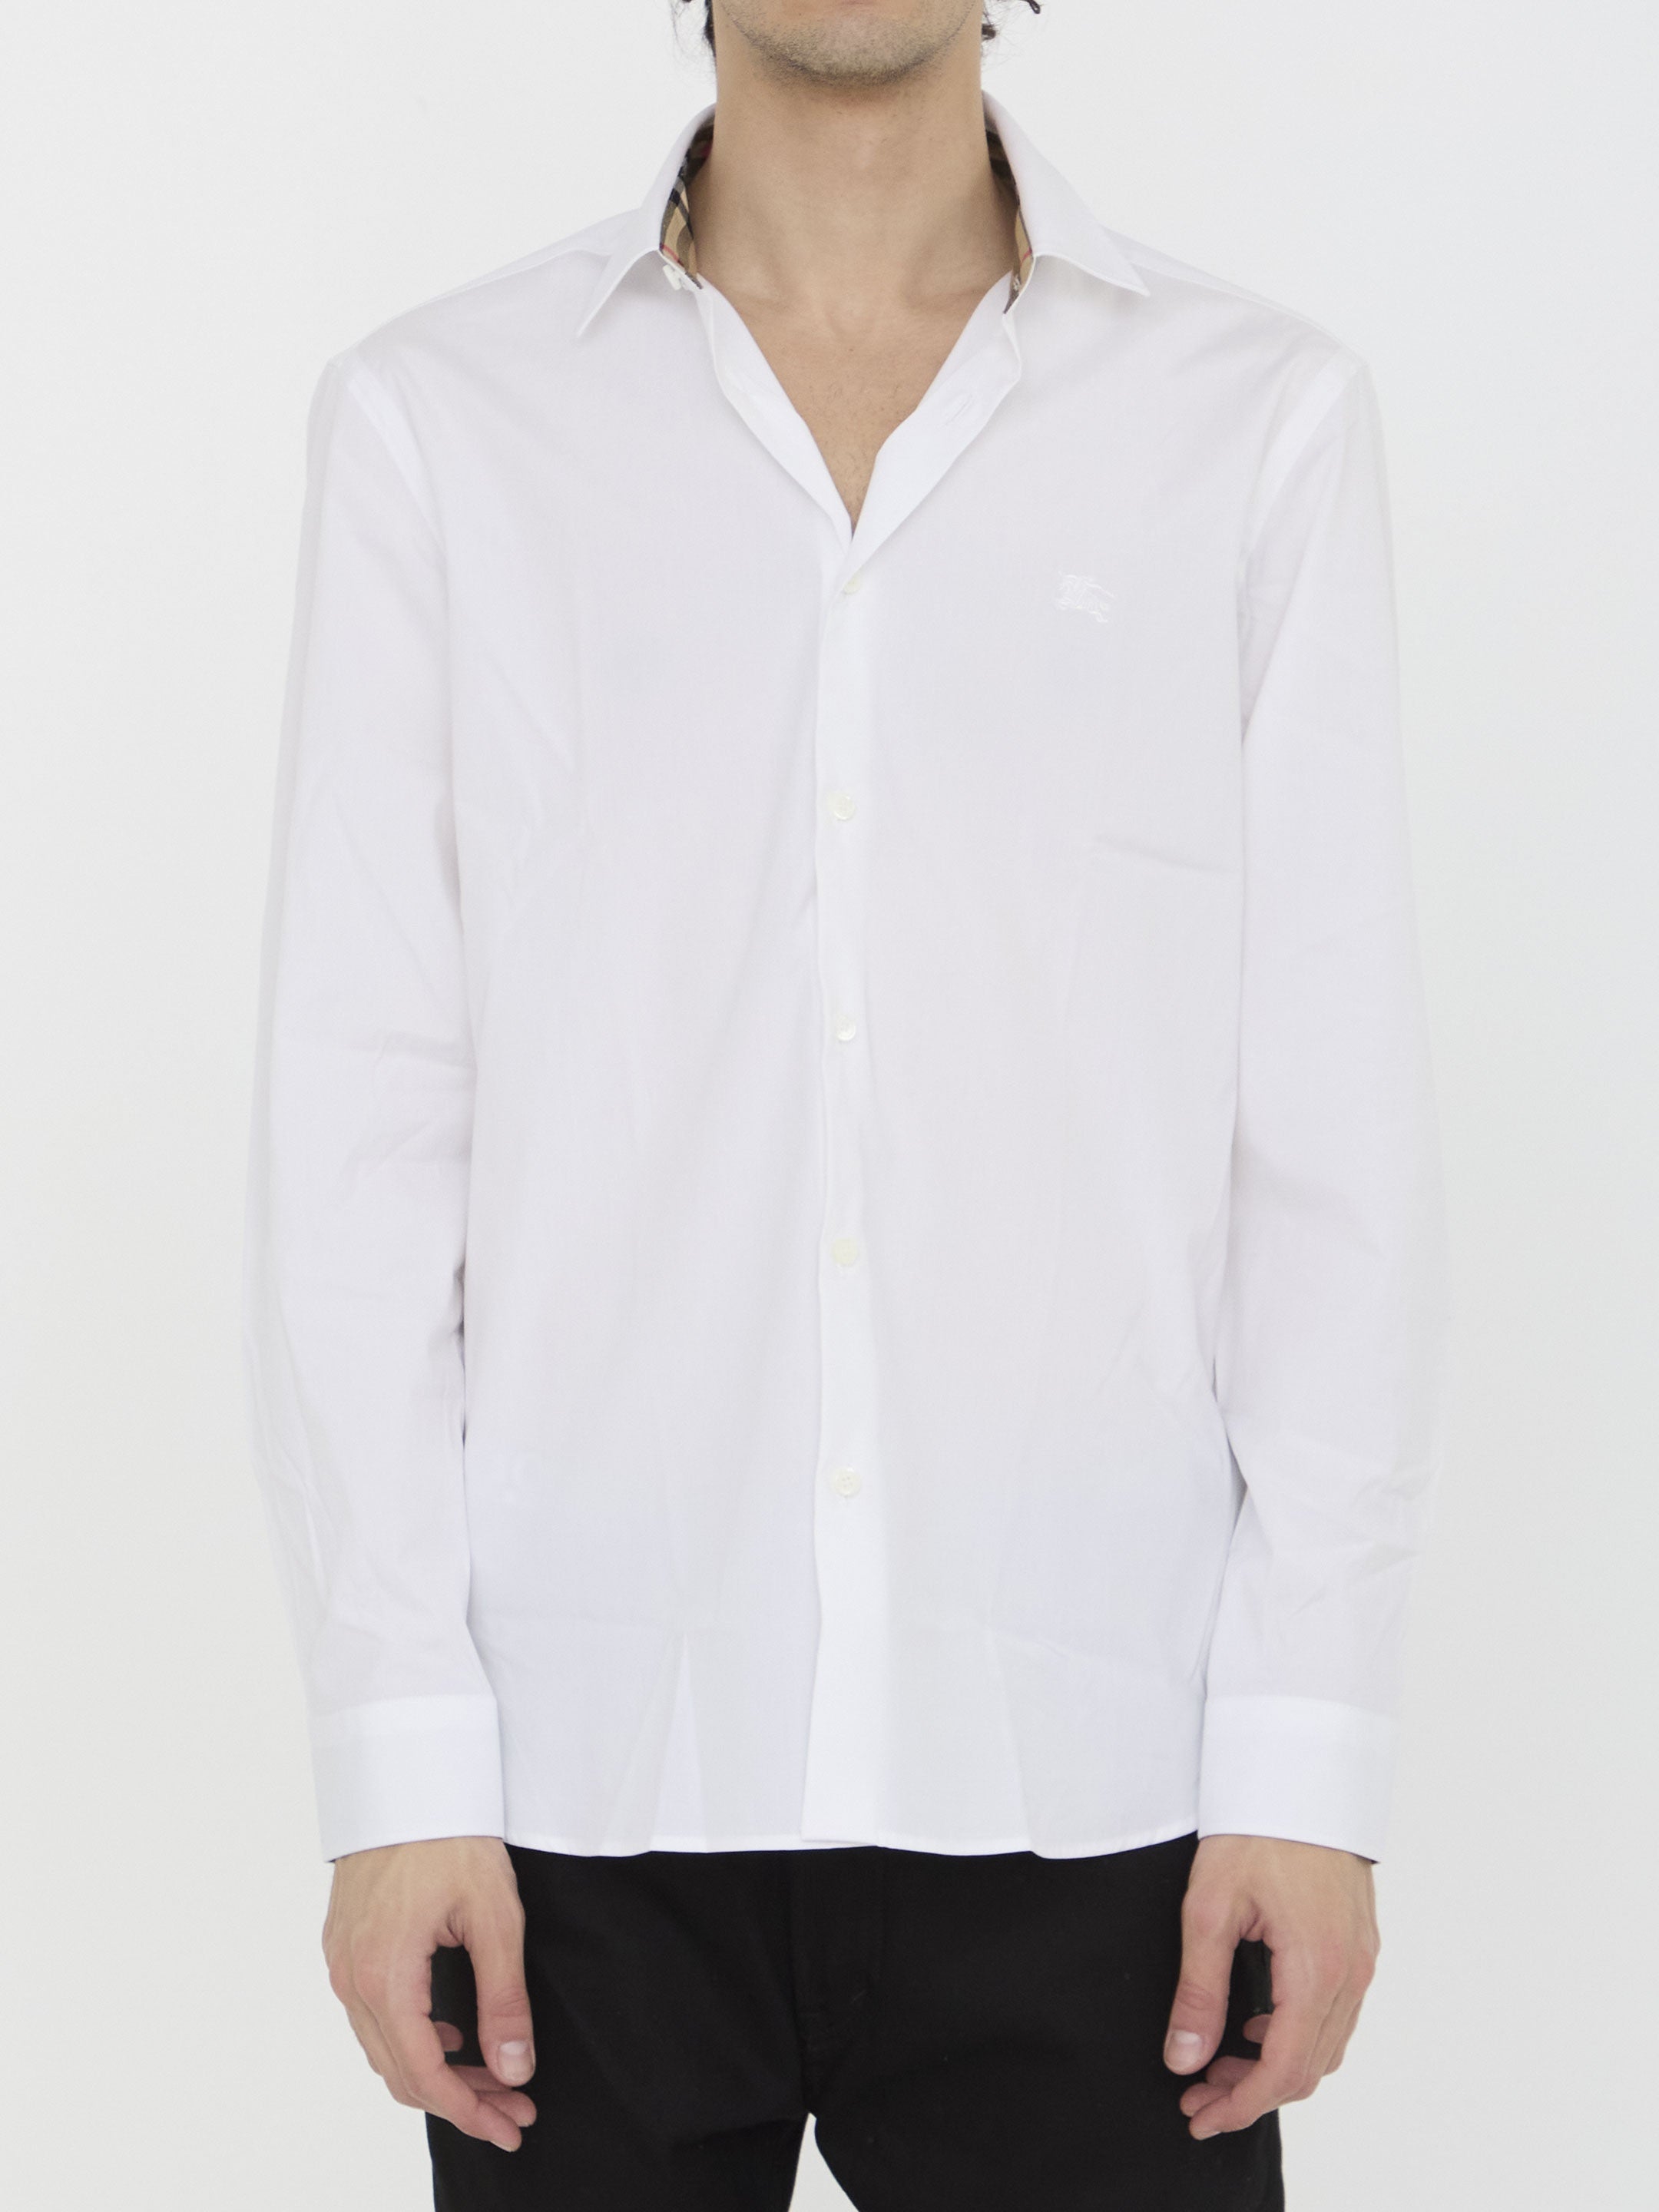 BURBERRY-OUTLET-SALE-Stretch-cotton-shirt-Shirts-M-WHITE-ARCHIVE-COLLECTION.jpg